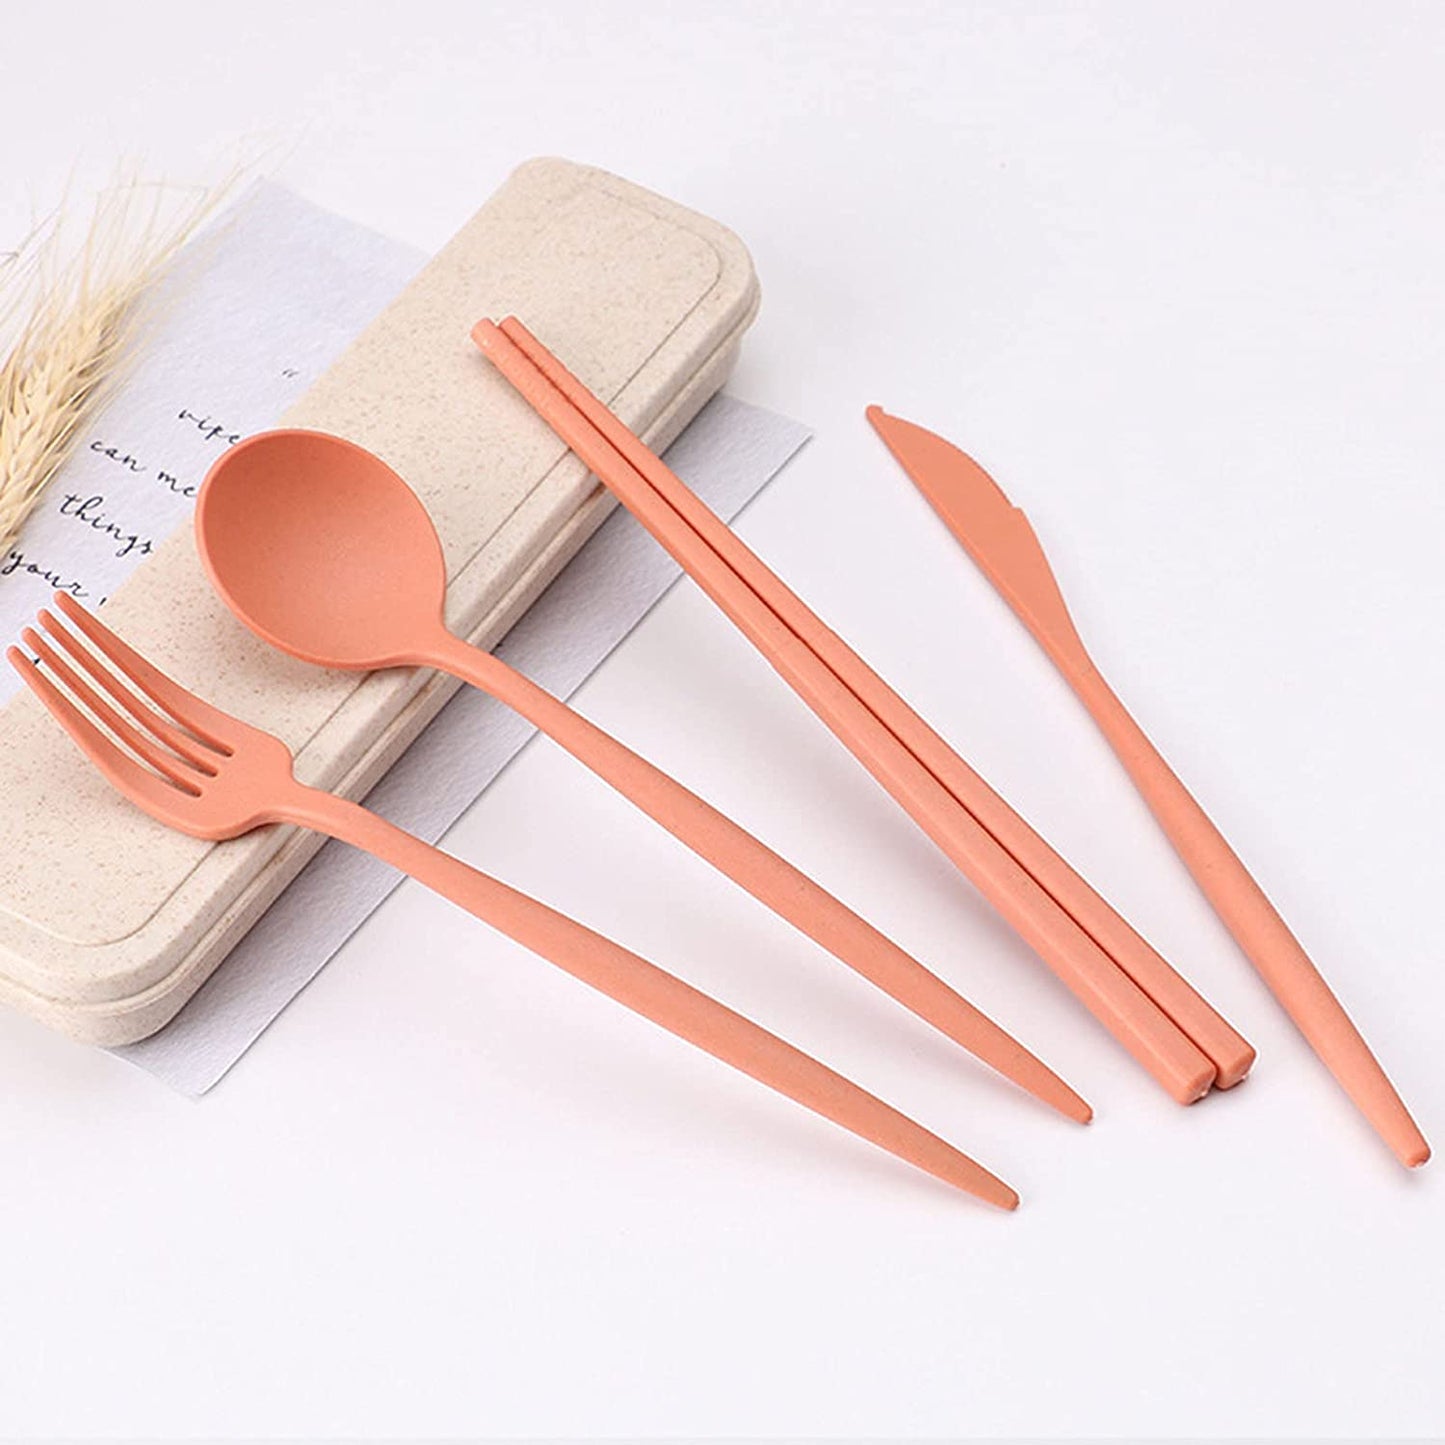 Plastic Travel Utensils, 4 Sets Plastic Spoons and Forks Set Plastic Silverware, Portable Reusable Utensils Set with Case for Lunch Box, Picnic, Travel, Camping